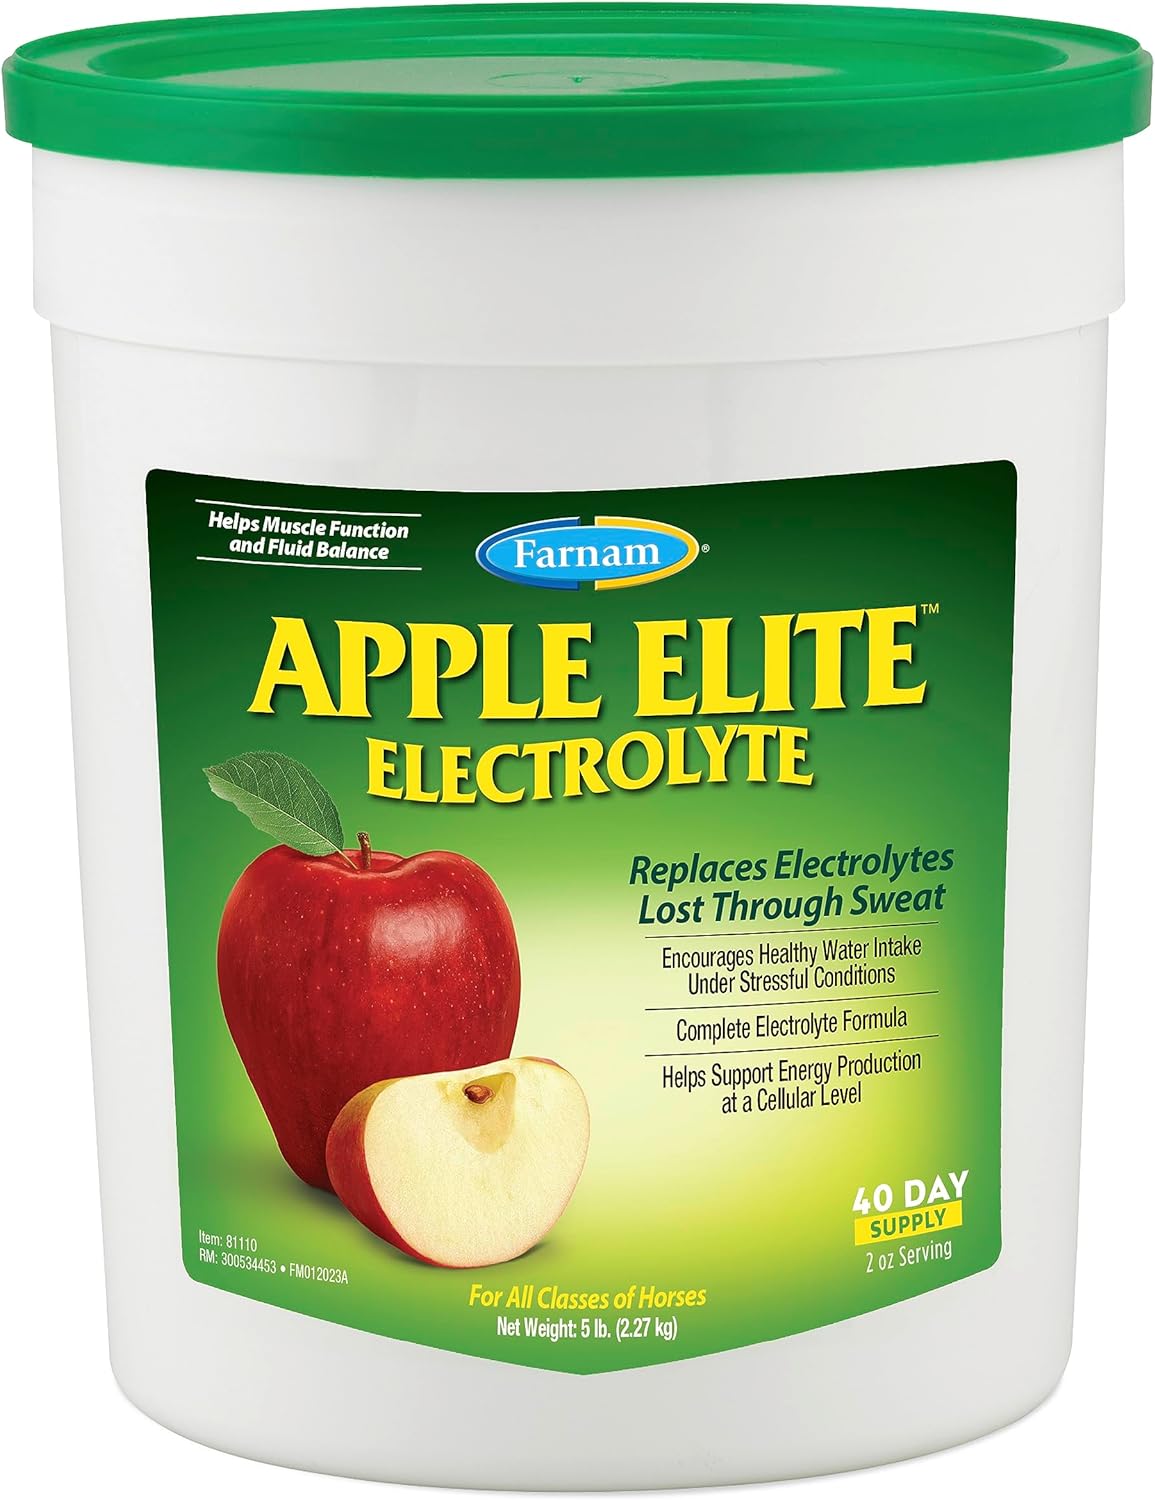 Farnam Apple Elite Horse Electrolyte Powder, Replaces minerals lost in sweat during exercise, extrem